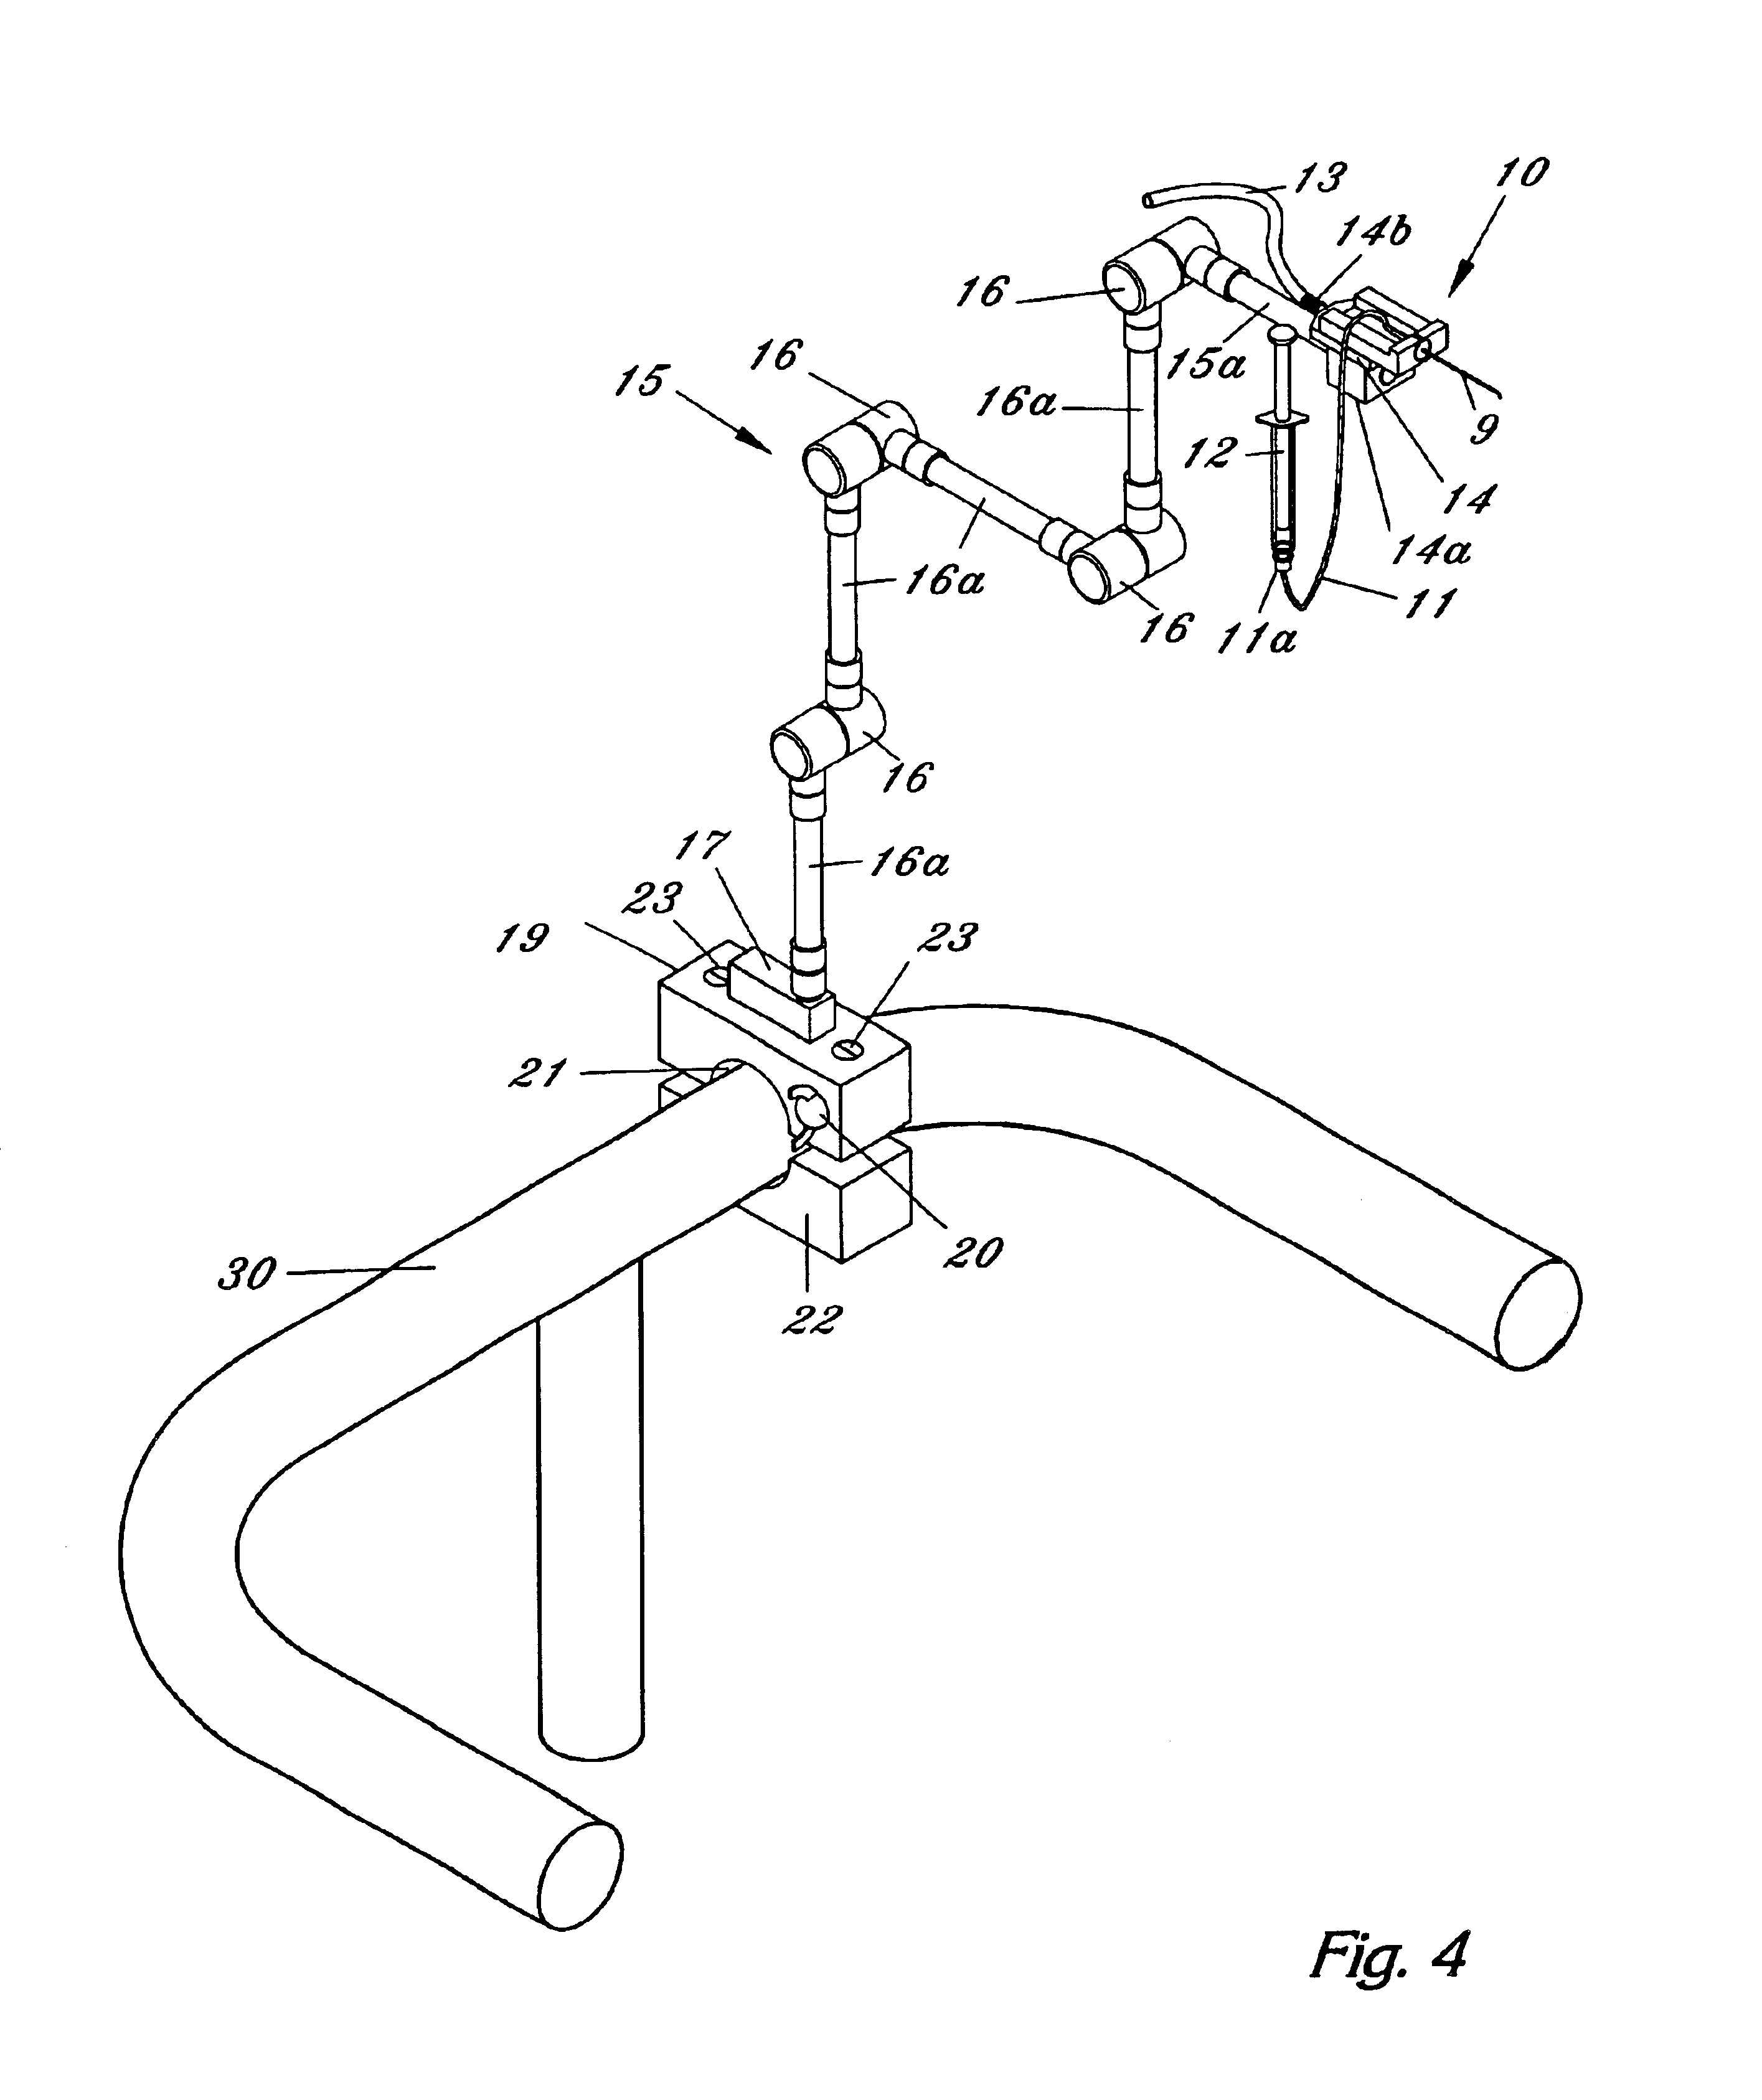 Apparatus and method for cannulating retinal blood vessels